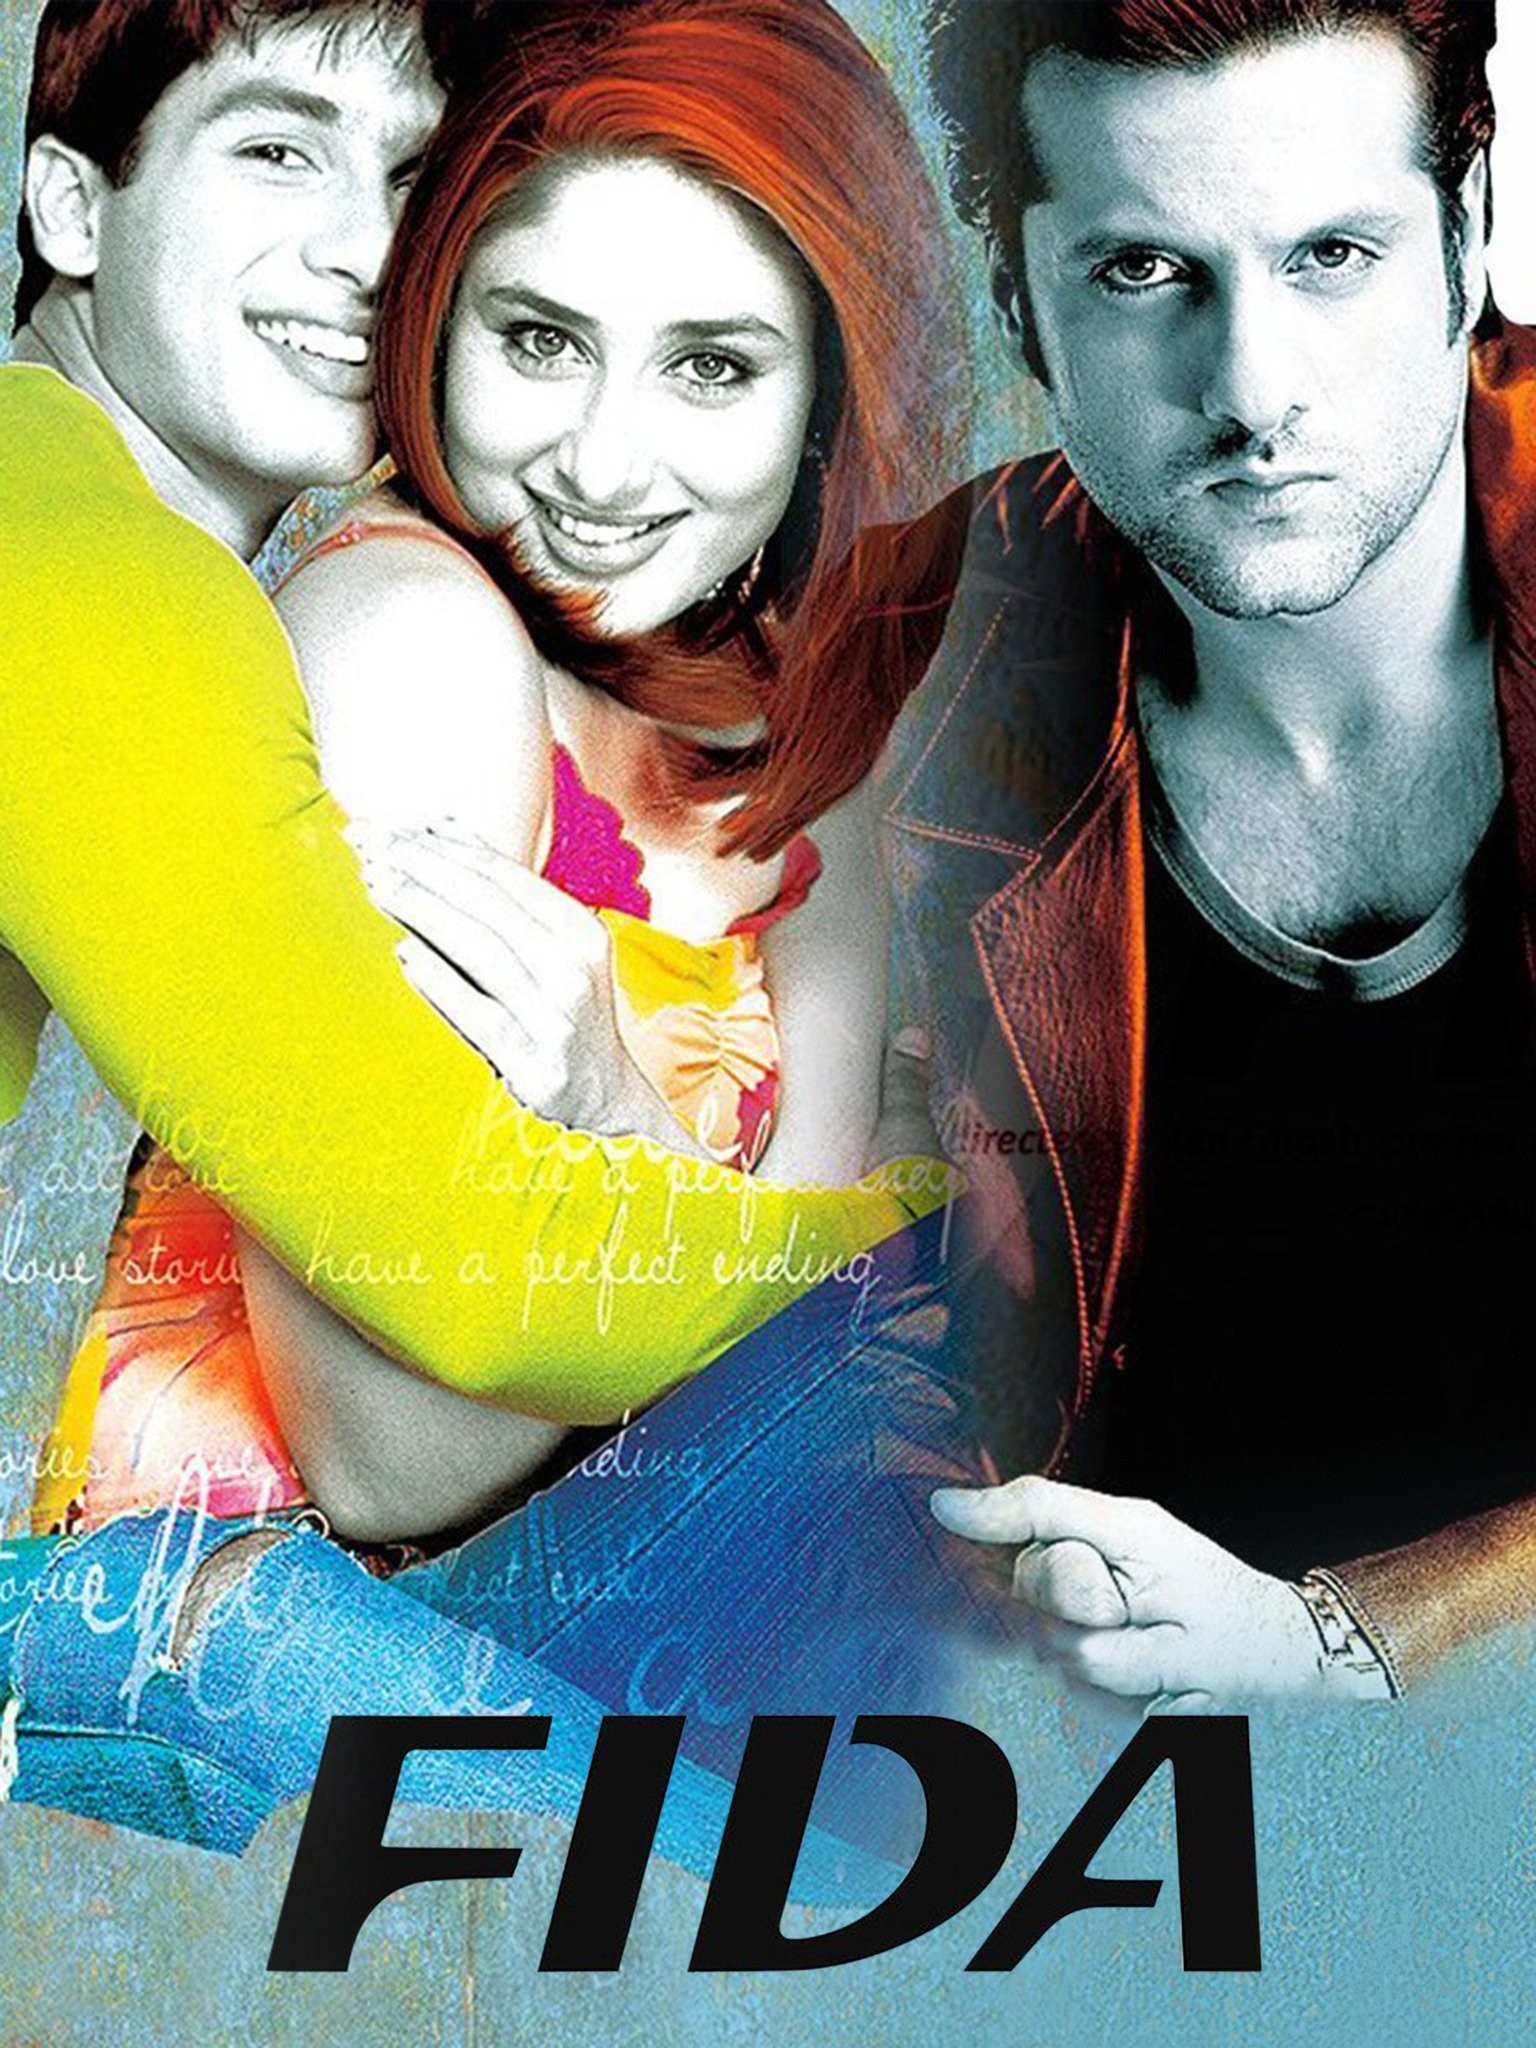 Watch Fidaa Full movie Online In HD | Find where to watch it online on  Justdial Malaysia